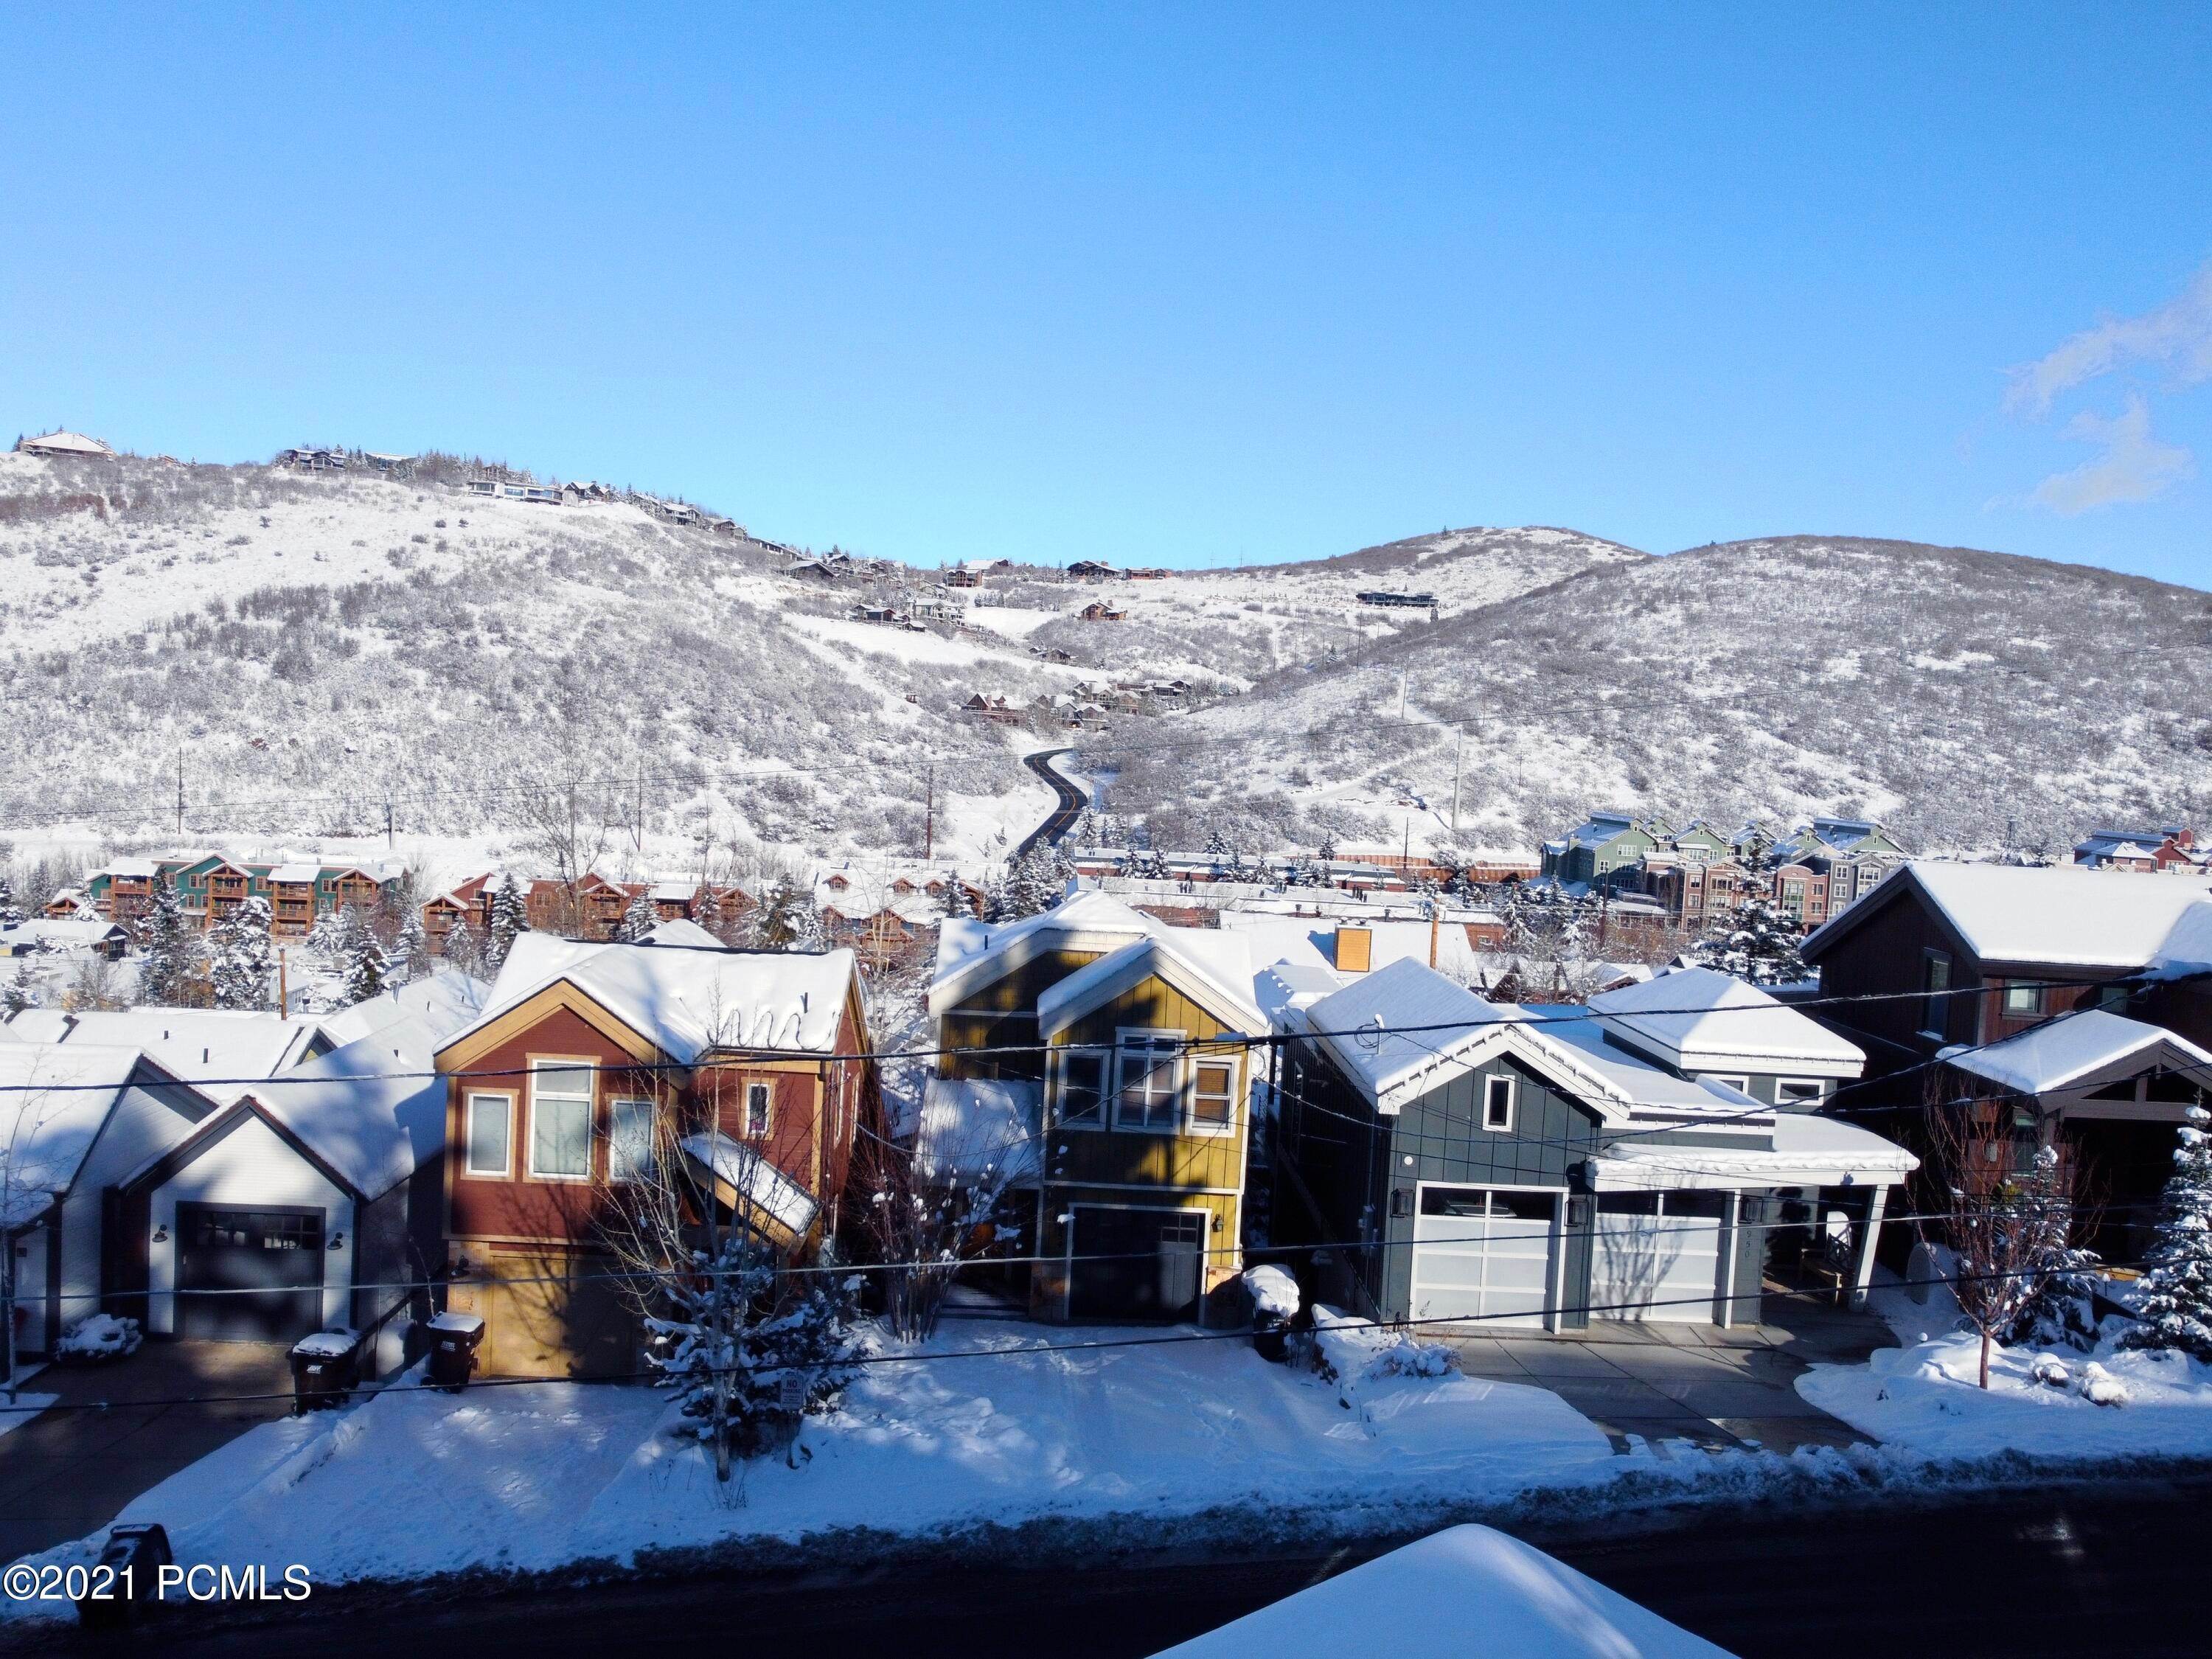 Residential Lots & Land for Sale at 949 Empire Avenue Park City, Utah 84060 United States